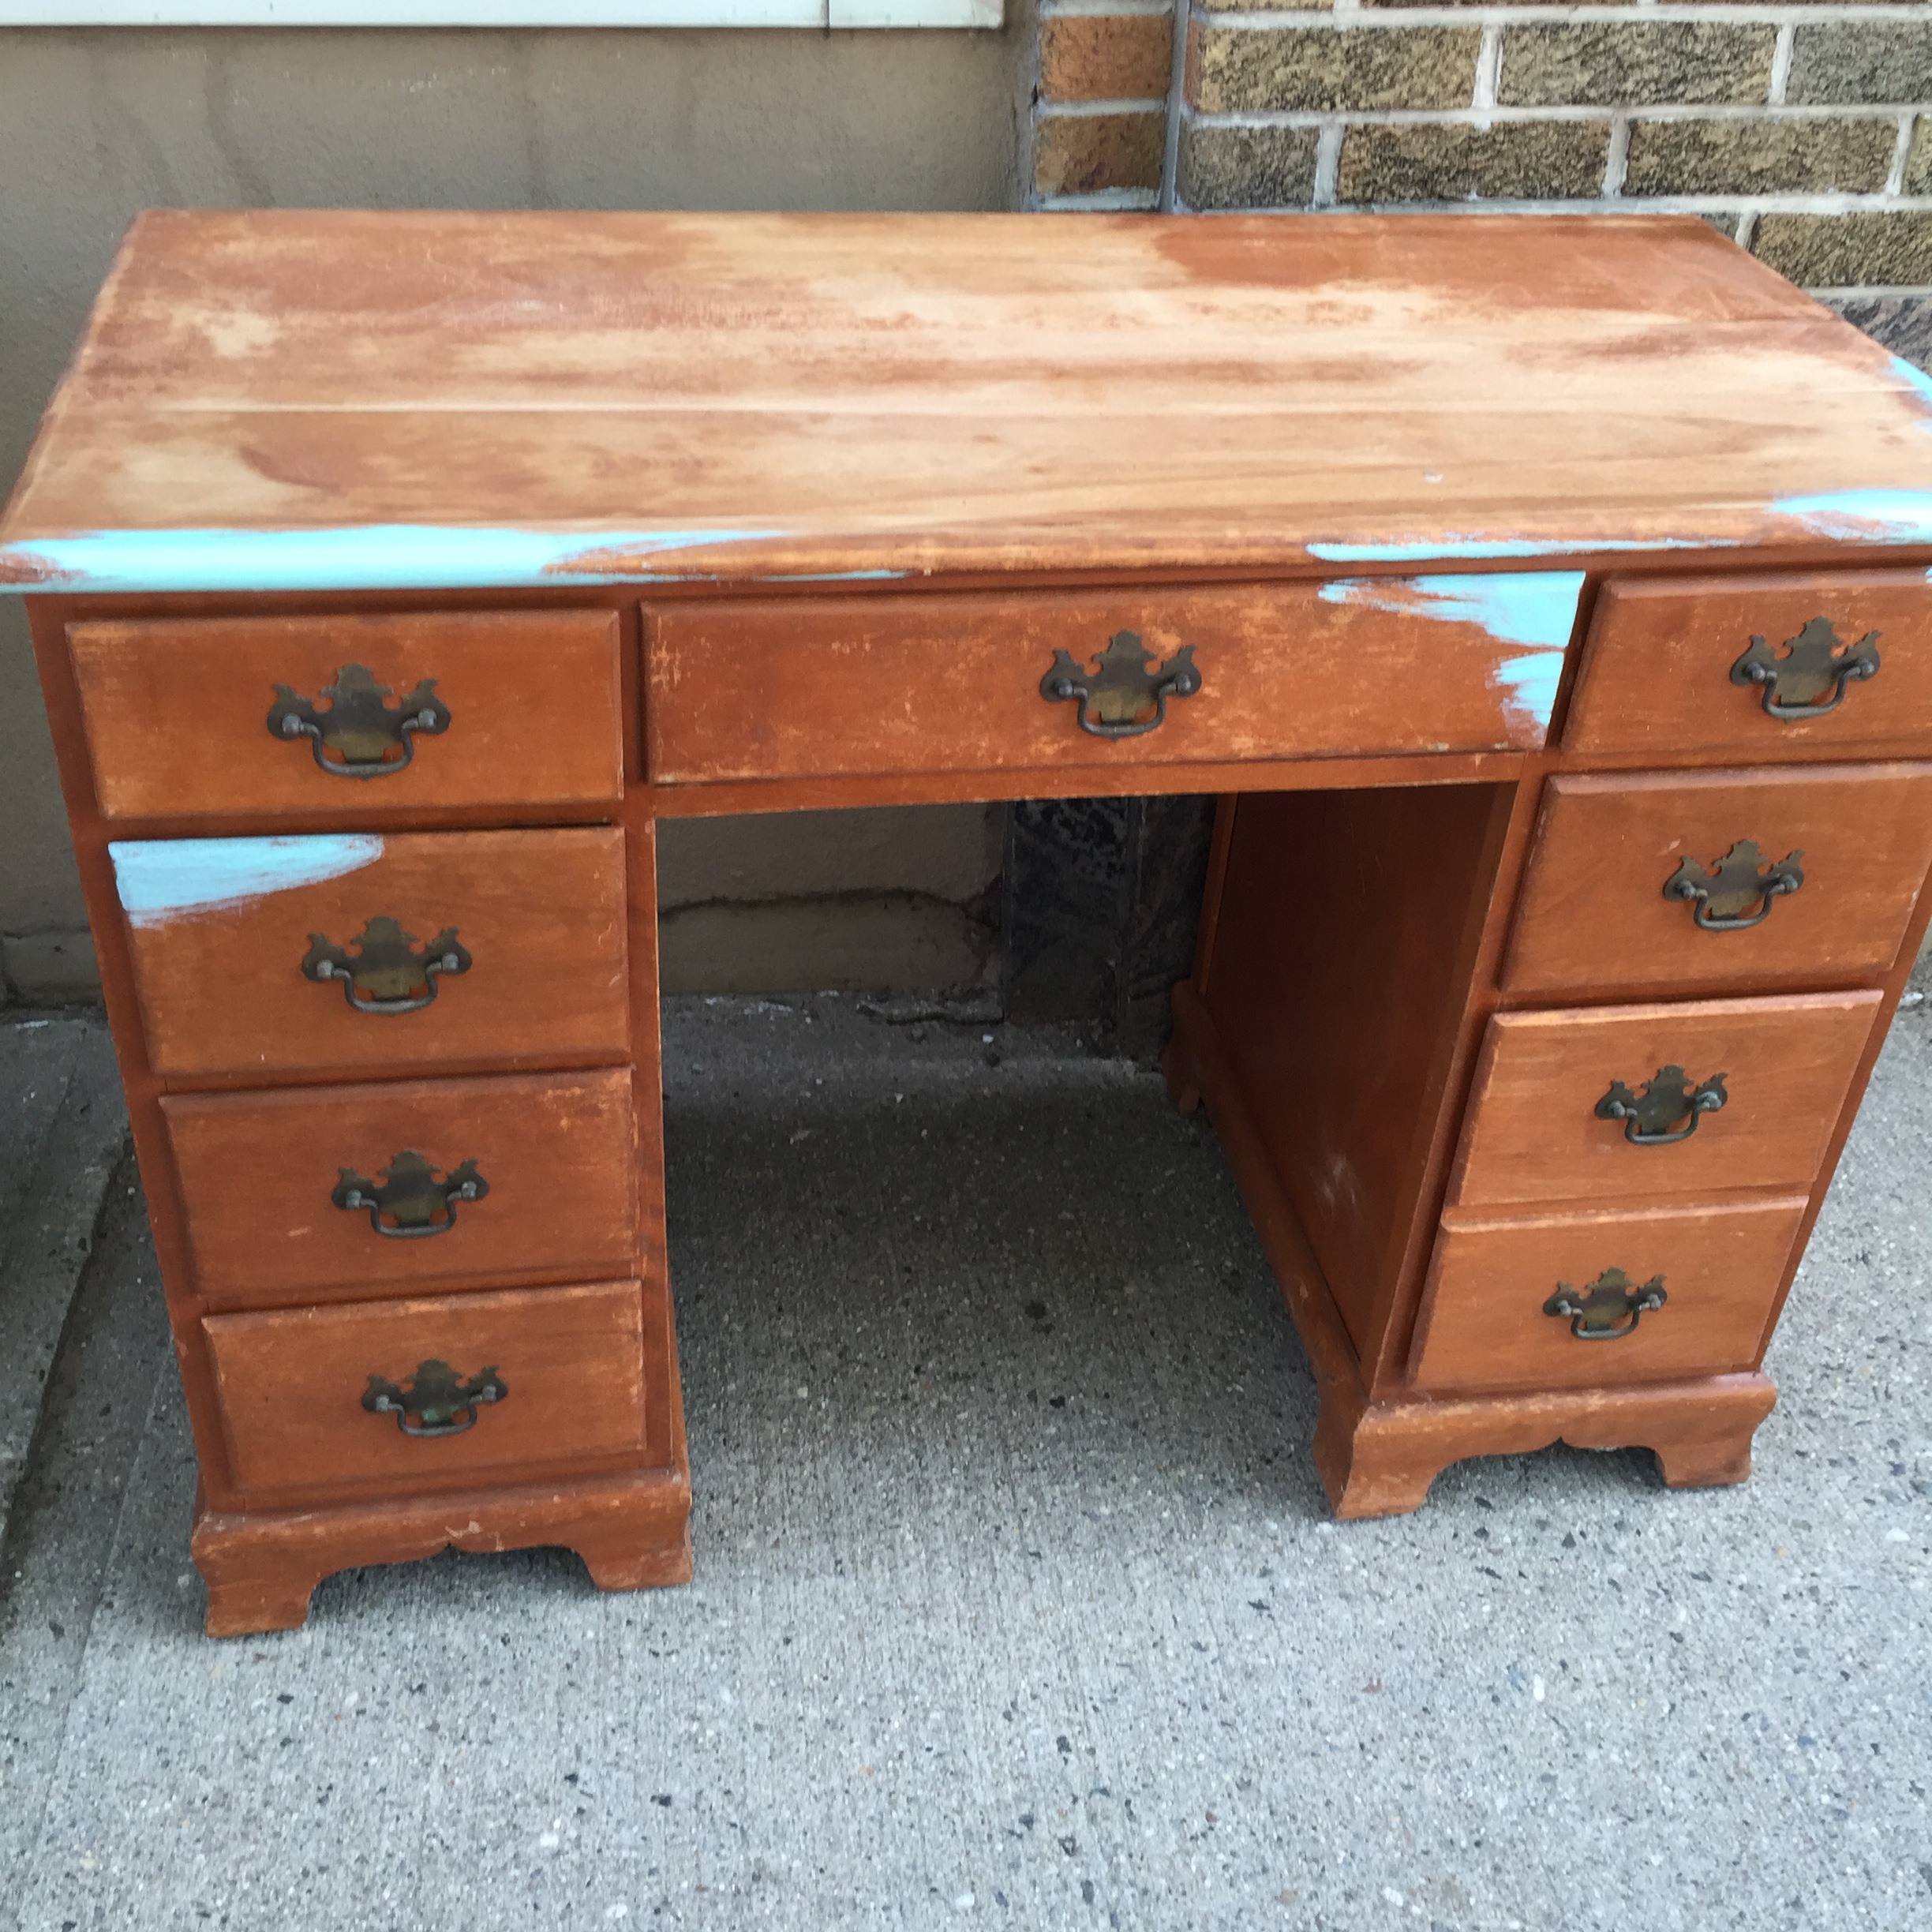 Project Desk Refinish In Traditional Stain Or Let Your